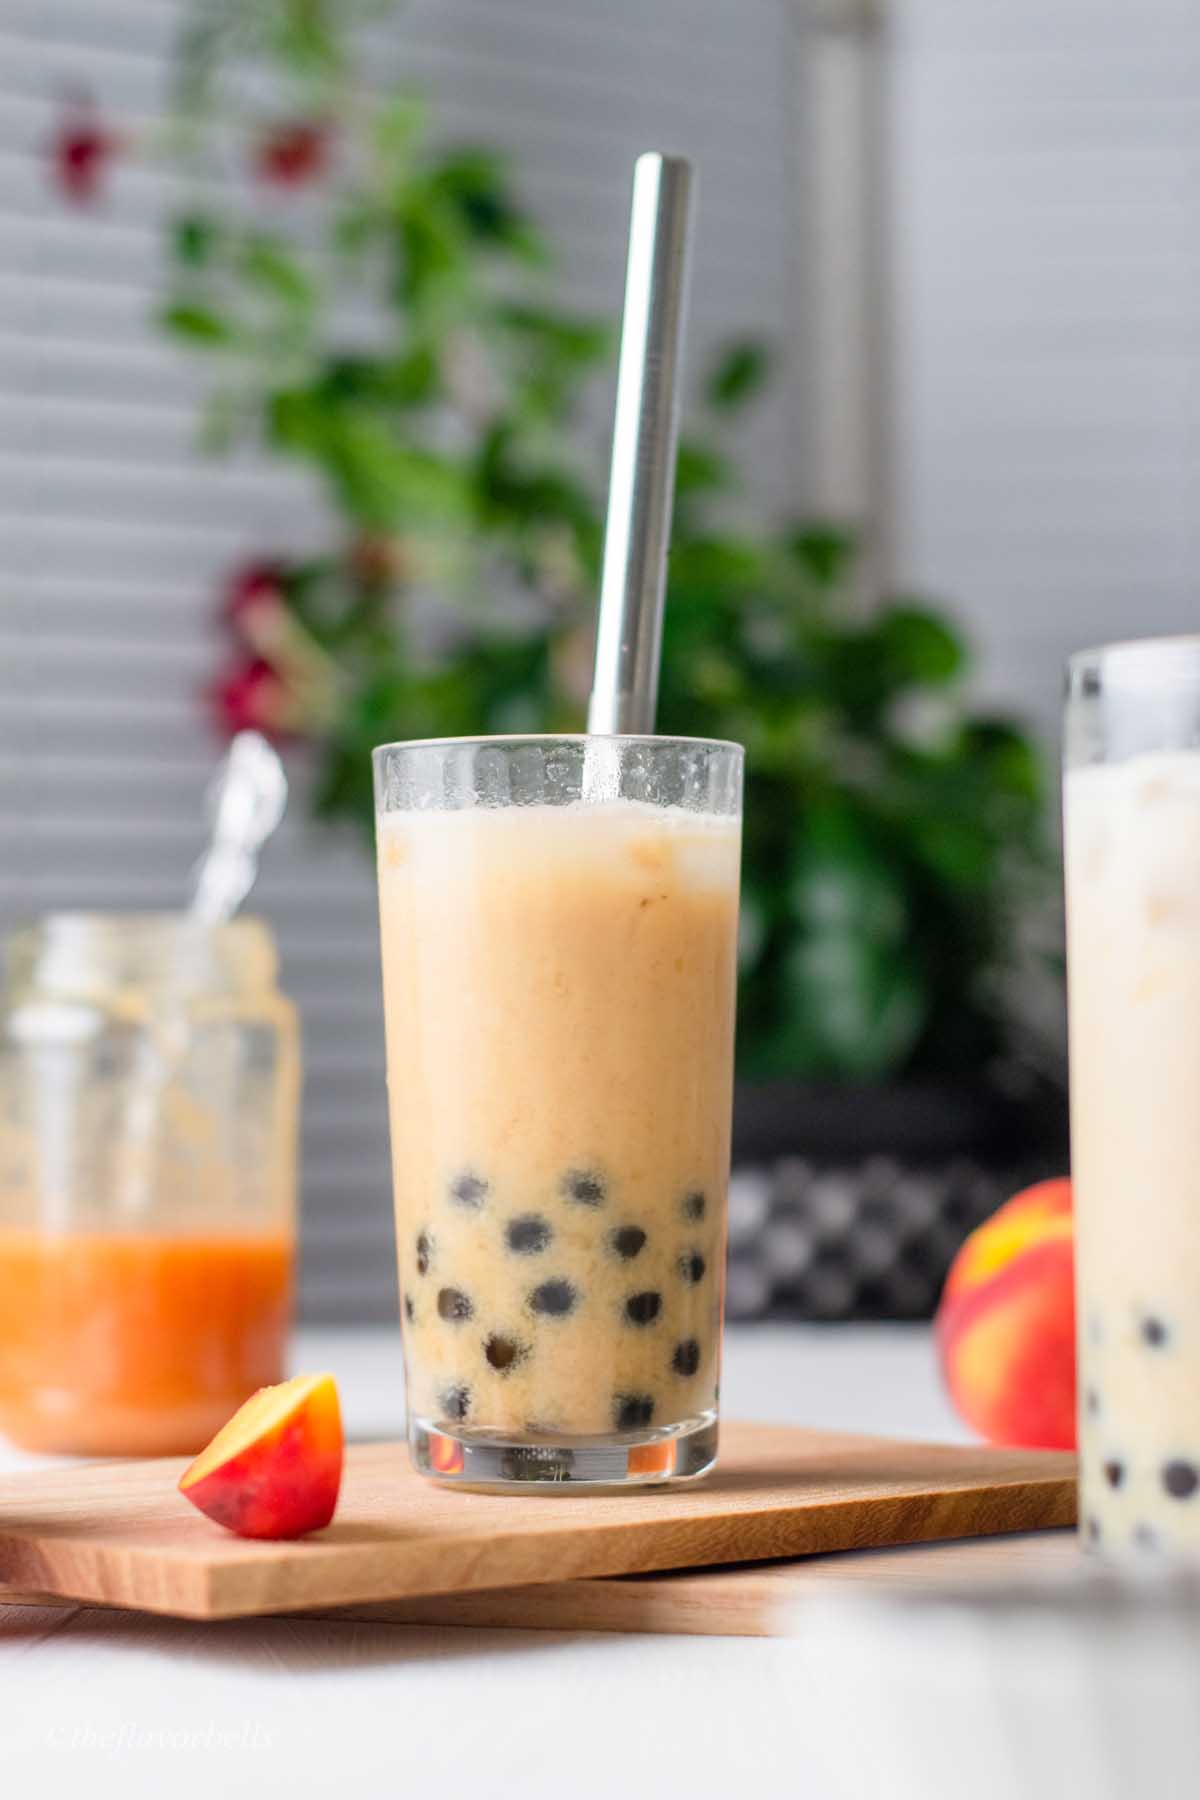 peach boba tea served with black boba pearls